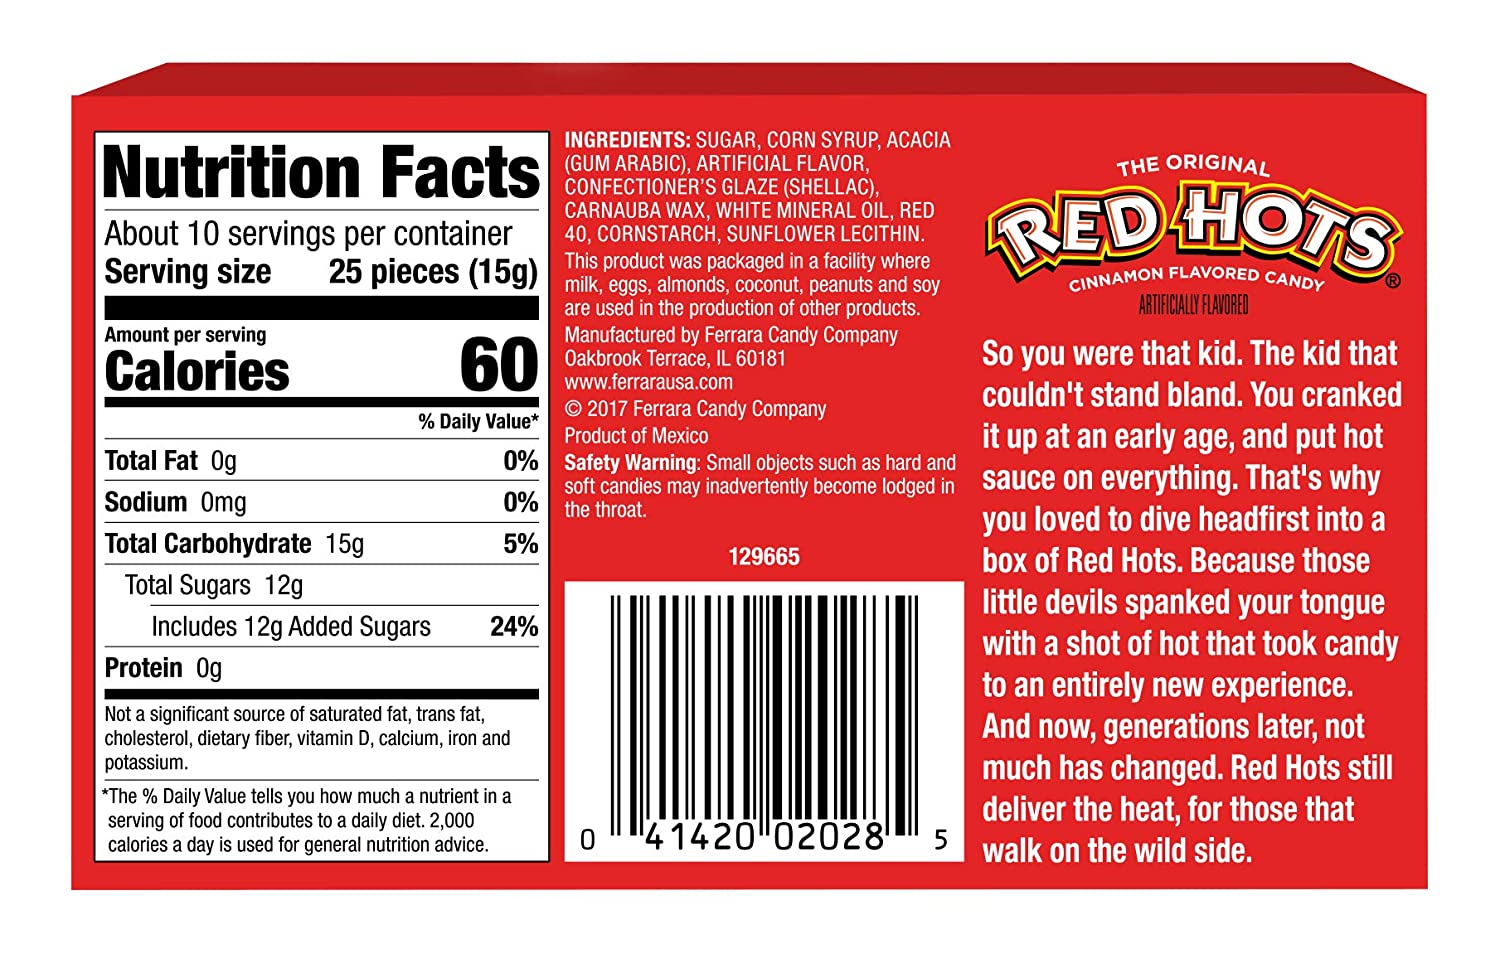 Red Hots Cinnamon Candies Red Hots 